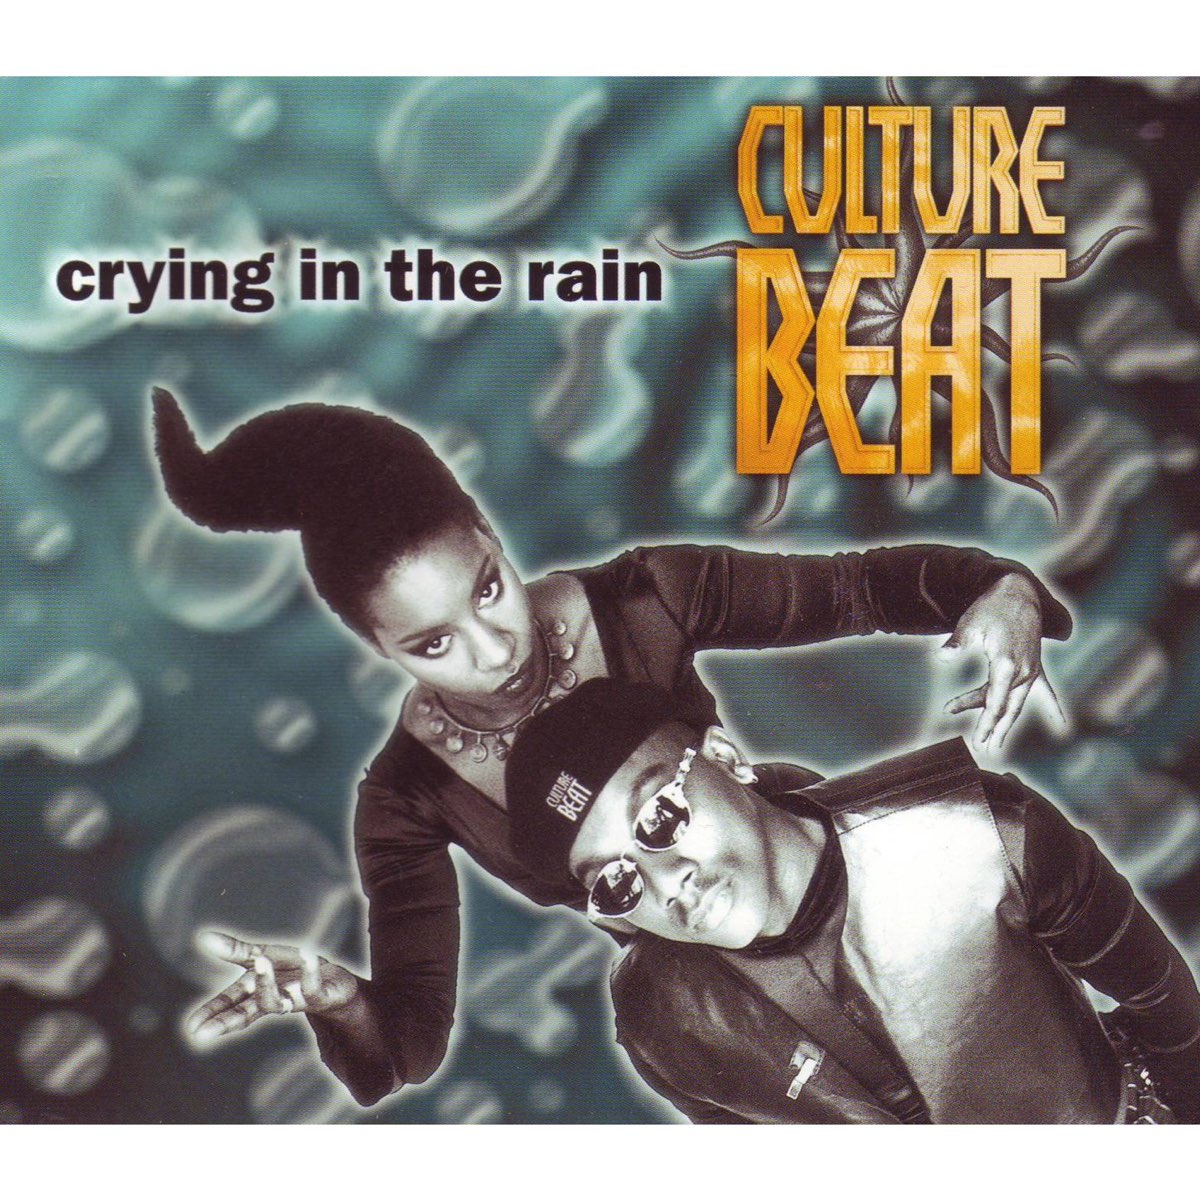 Crying in the Rain - Single - Album by Culture Beat - Apple Music